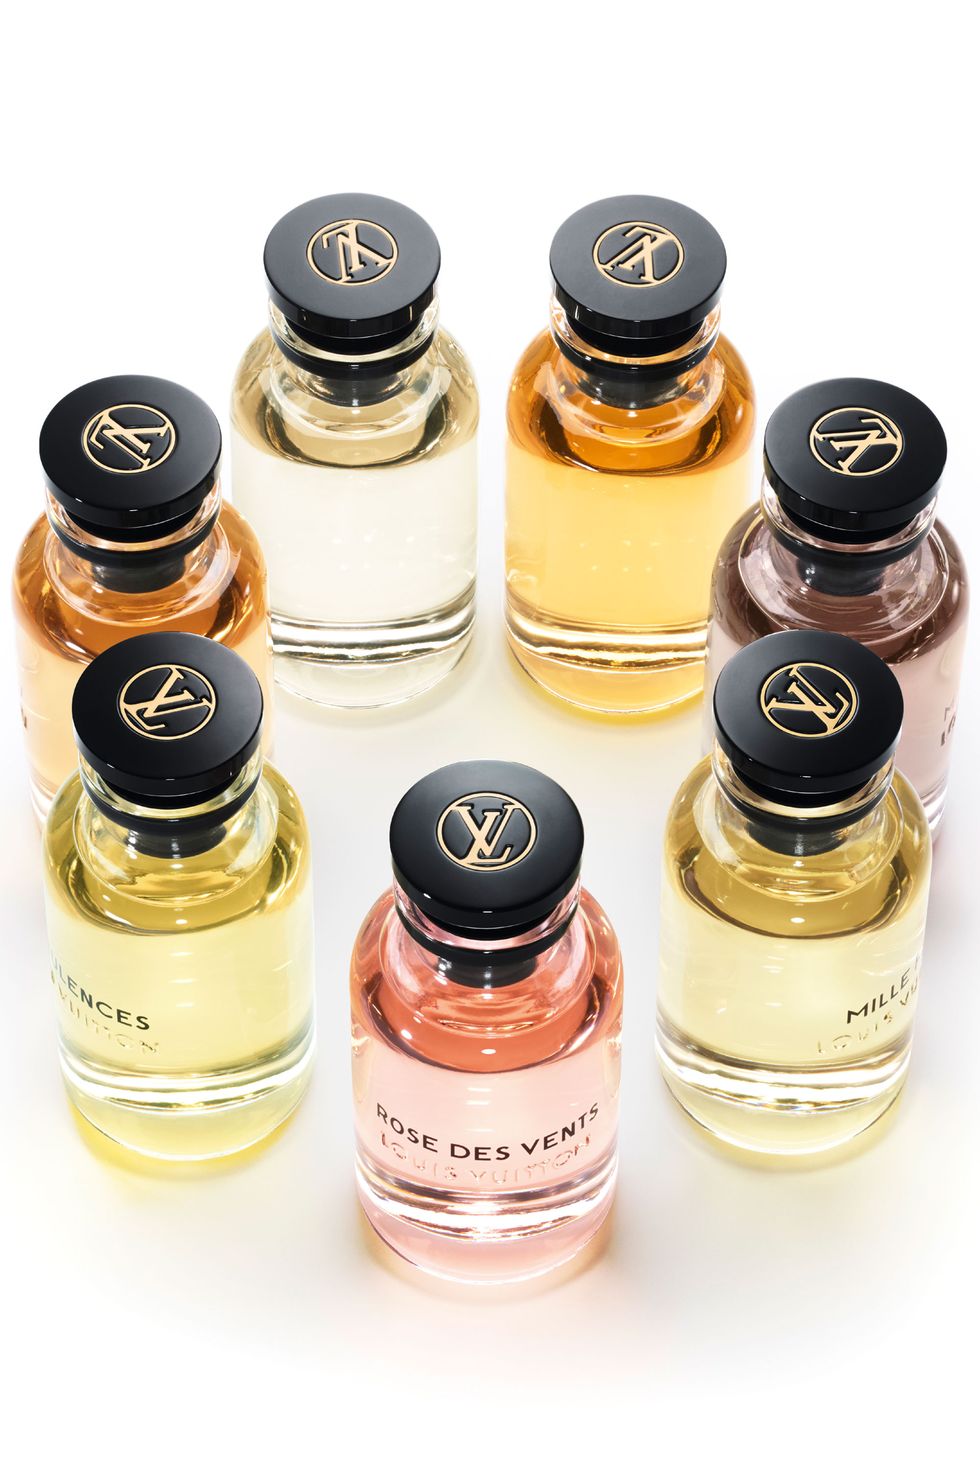 The story behind Louis Vuitton's new fragrances